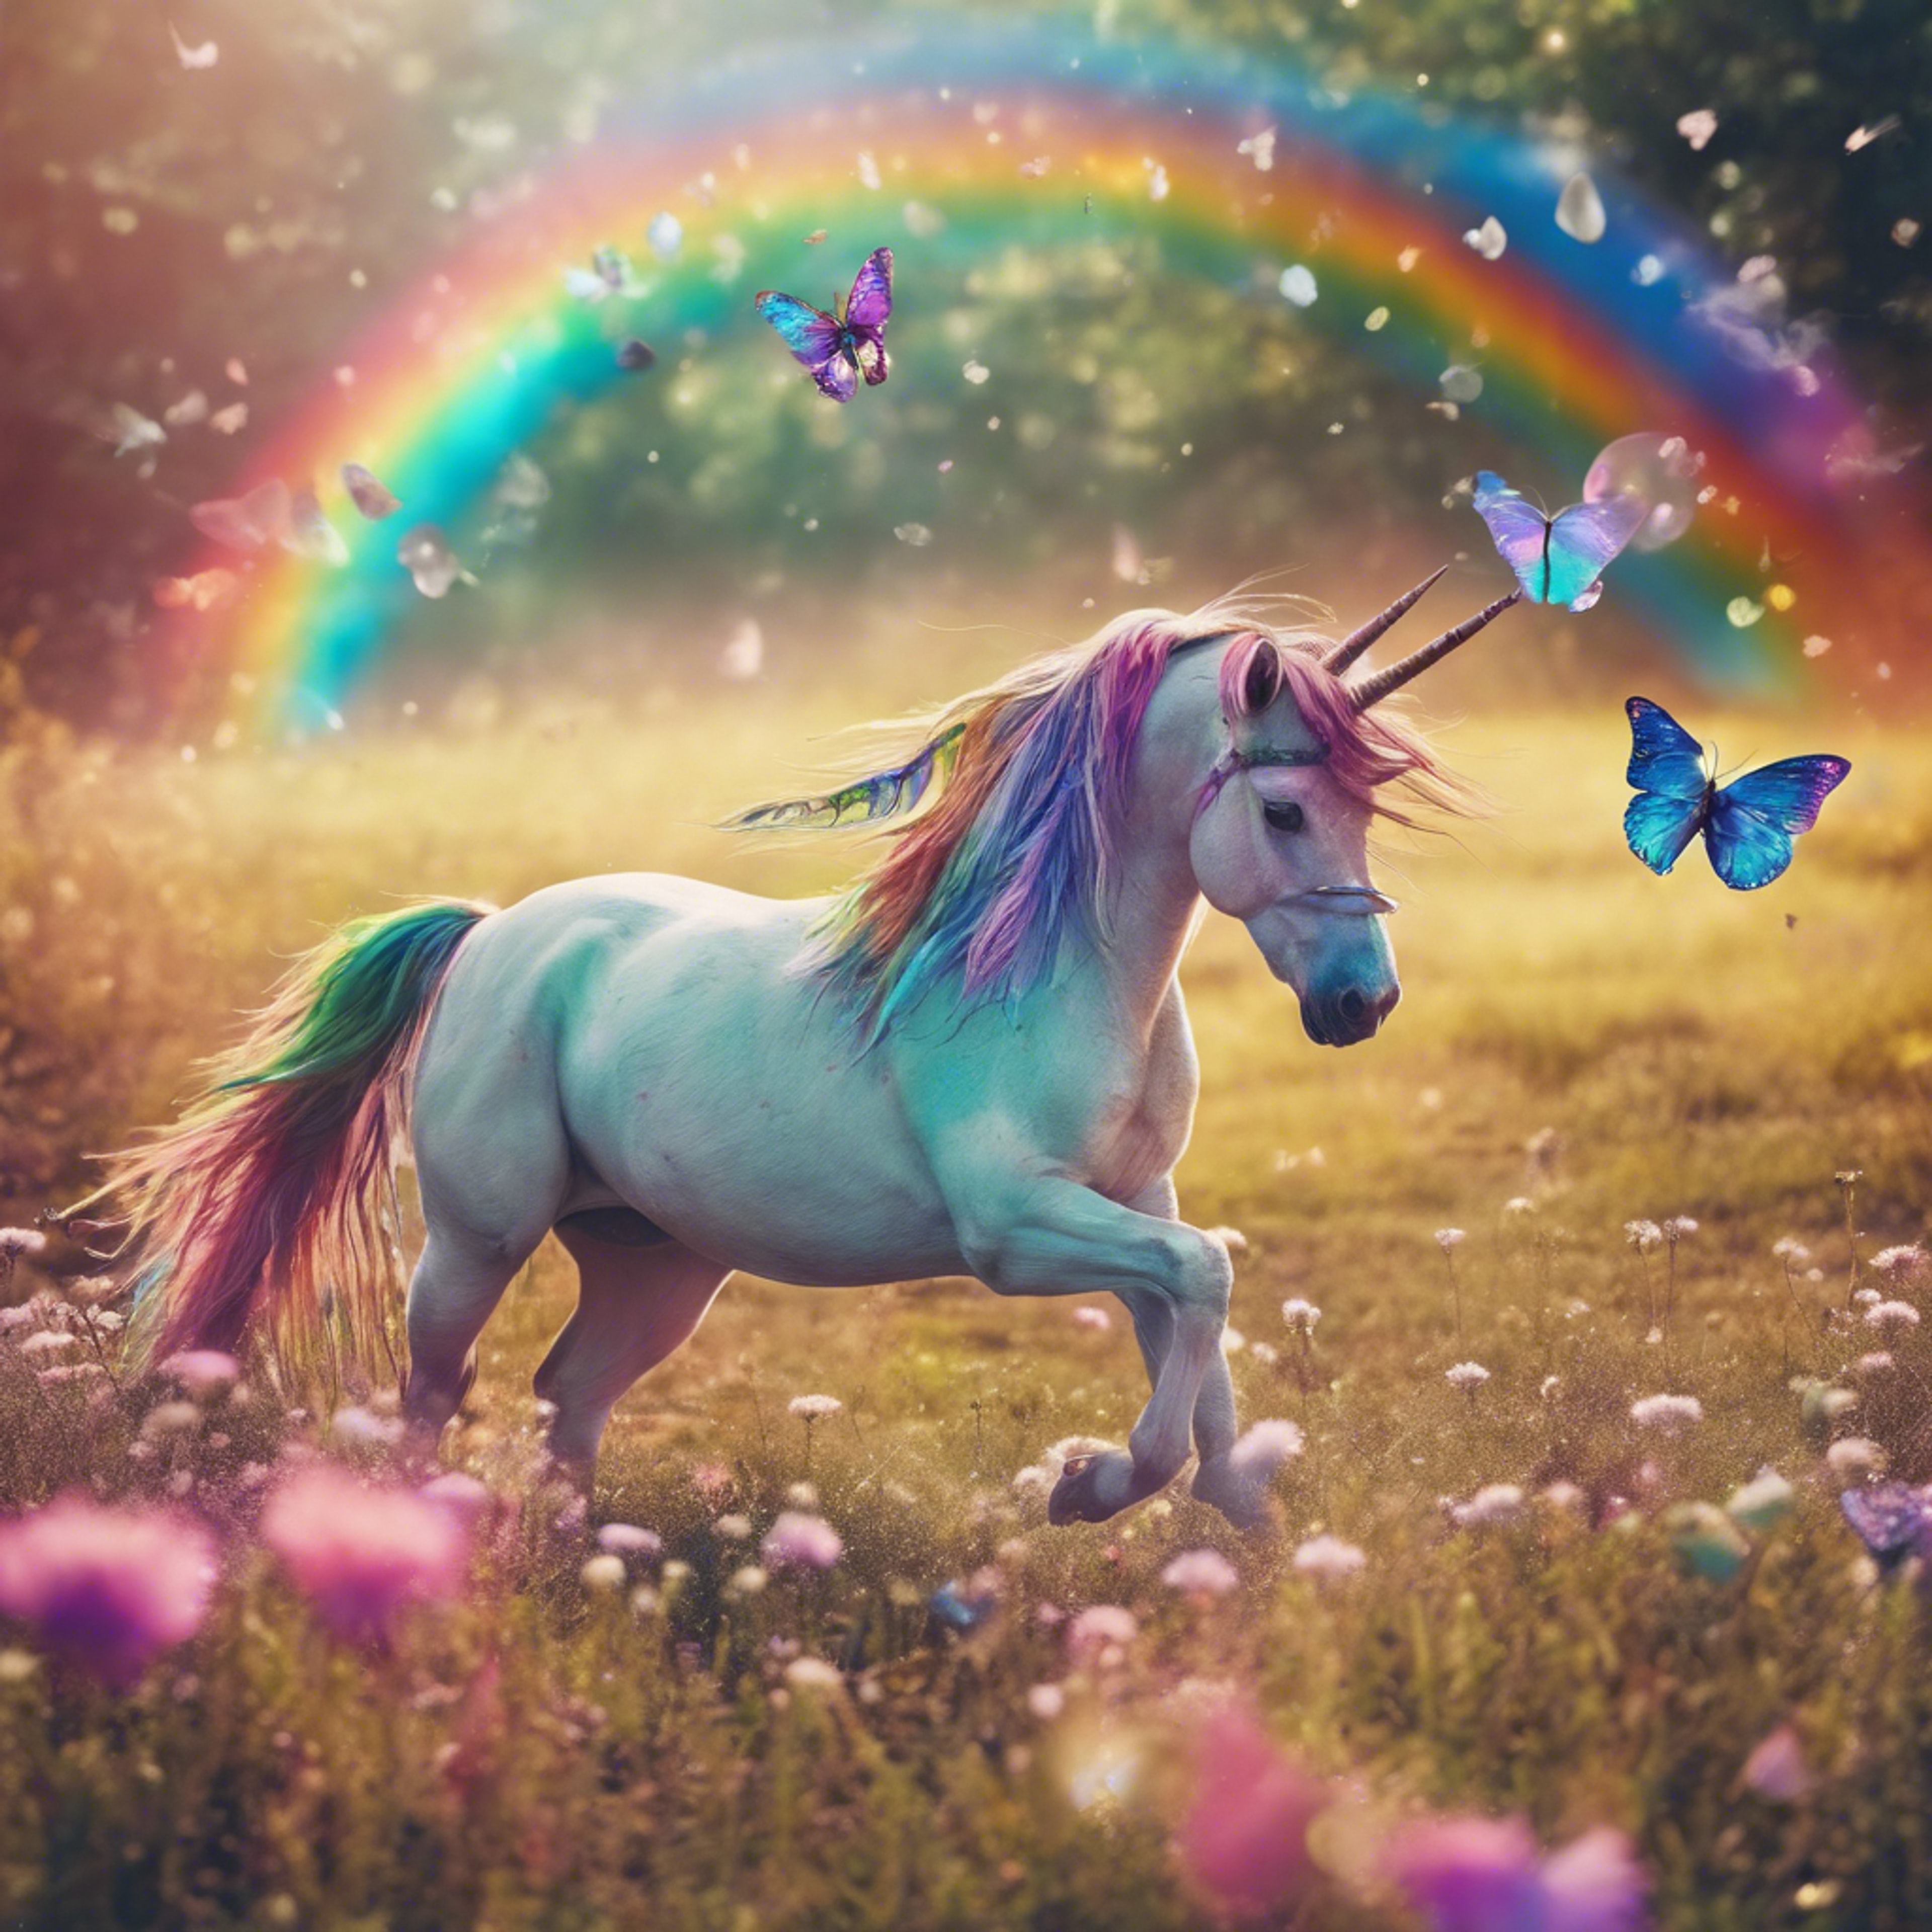 A boho rainbow featured with a flying unicorn and rainbow-colored butterflies. Wallpaper[ea987c8eccb342f0bbdd]